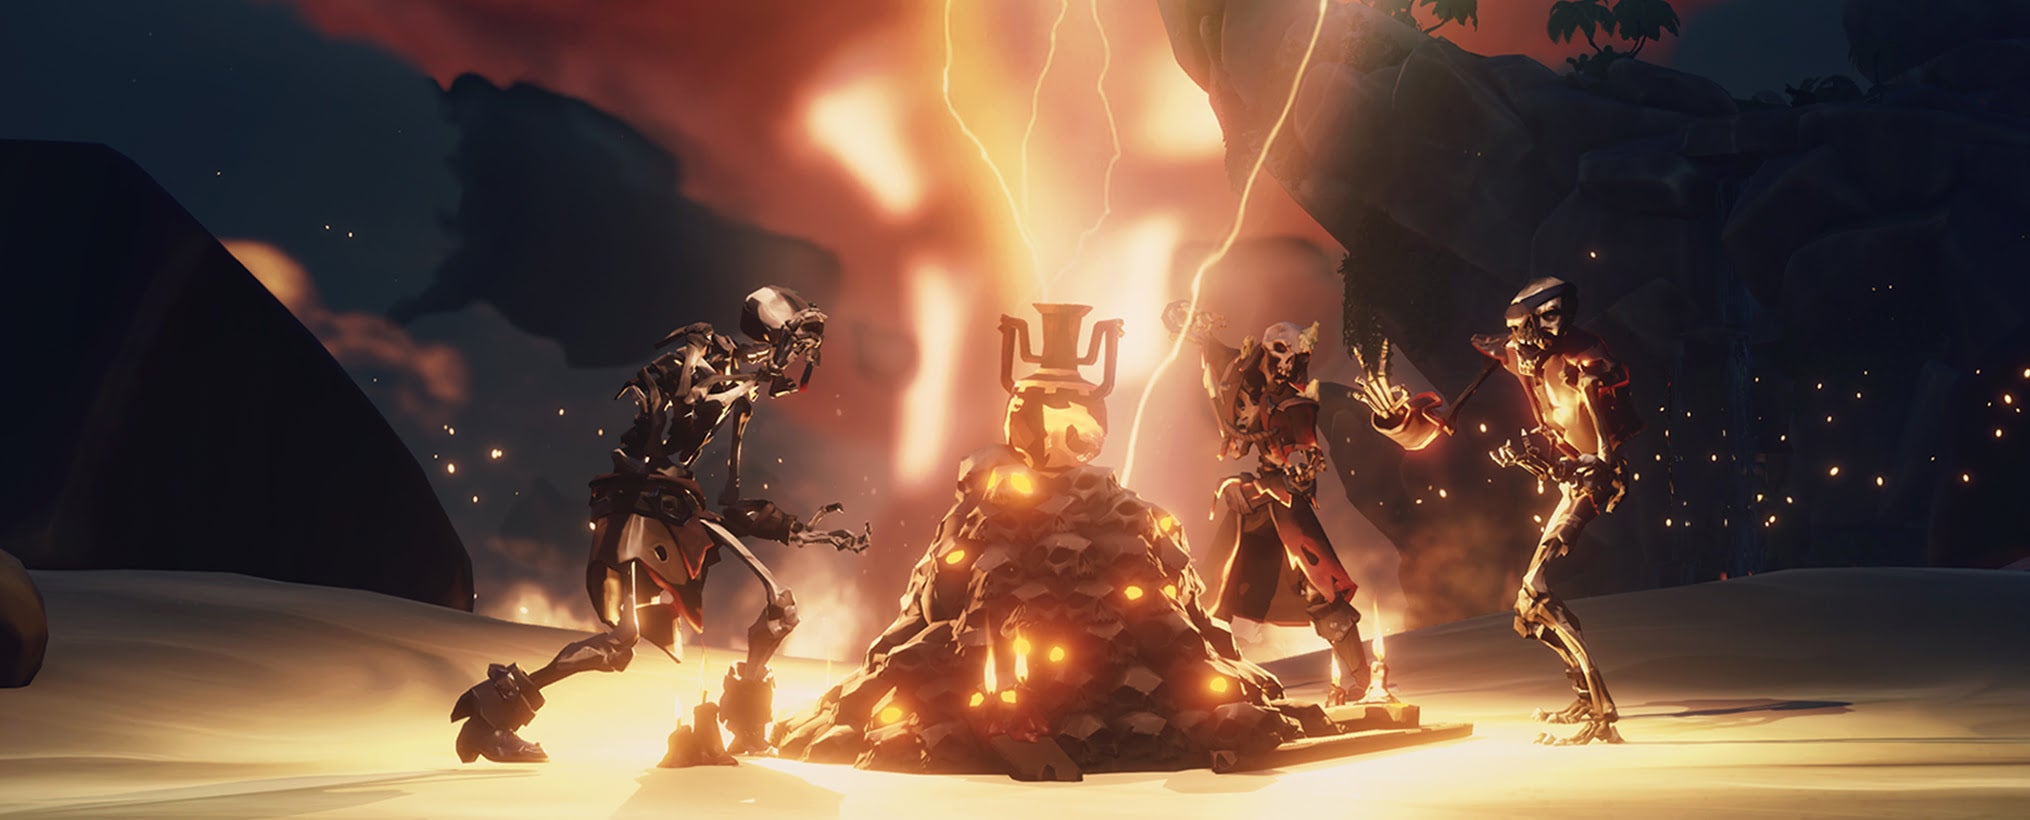 Image for Sea of Thieves update Ashen Winds has Ashen Lords who spit fire, scorched pets, more